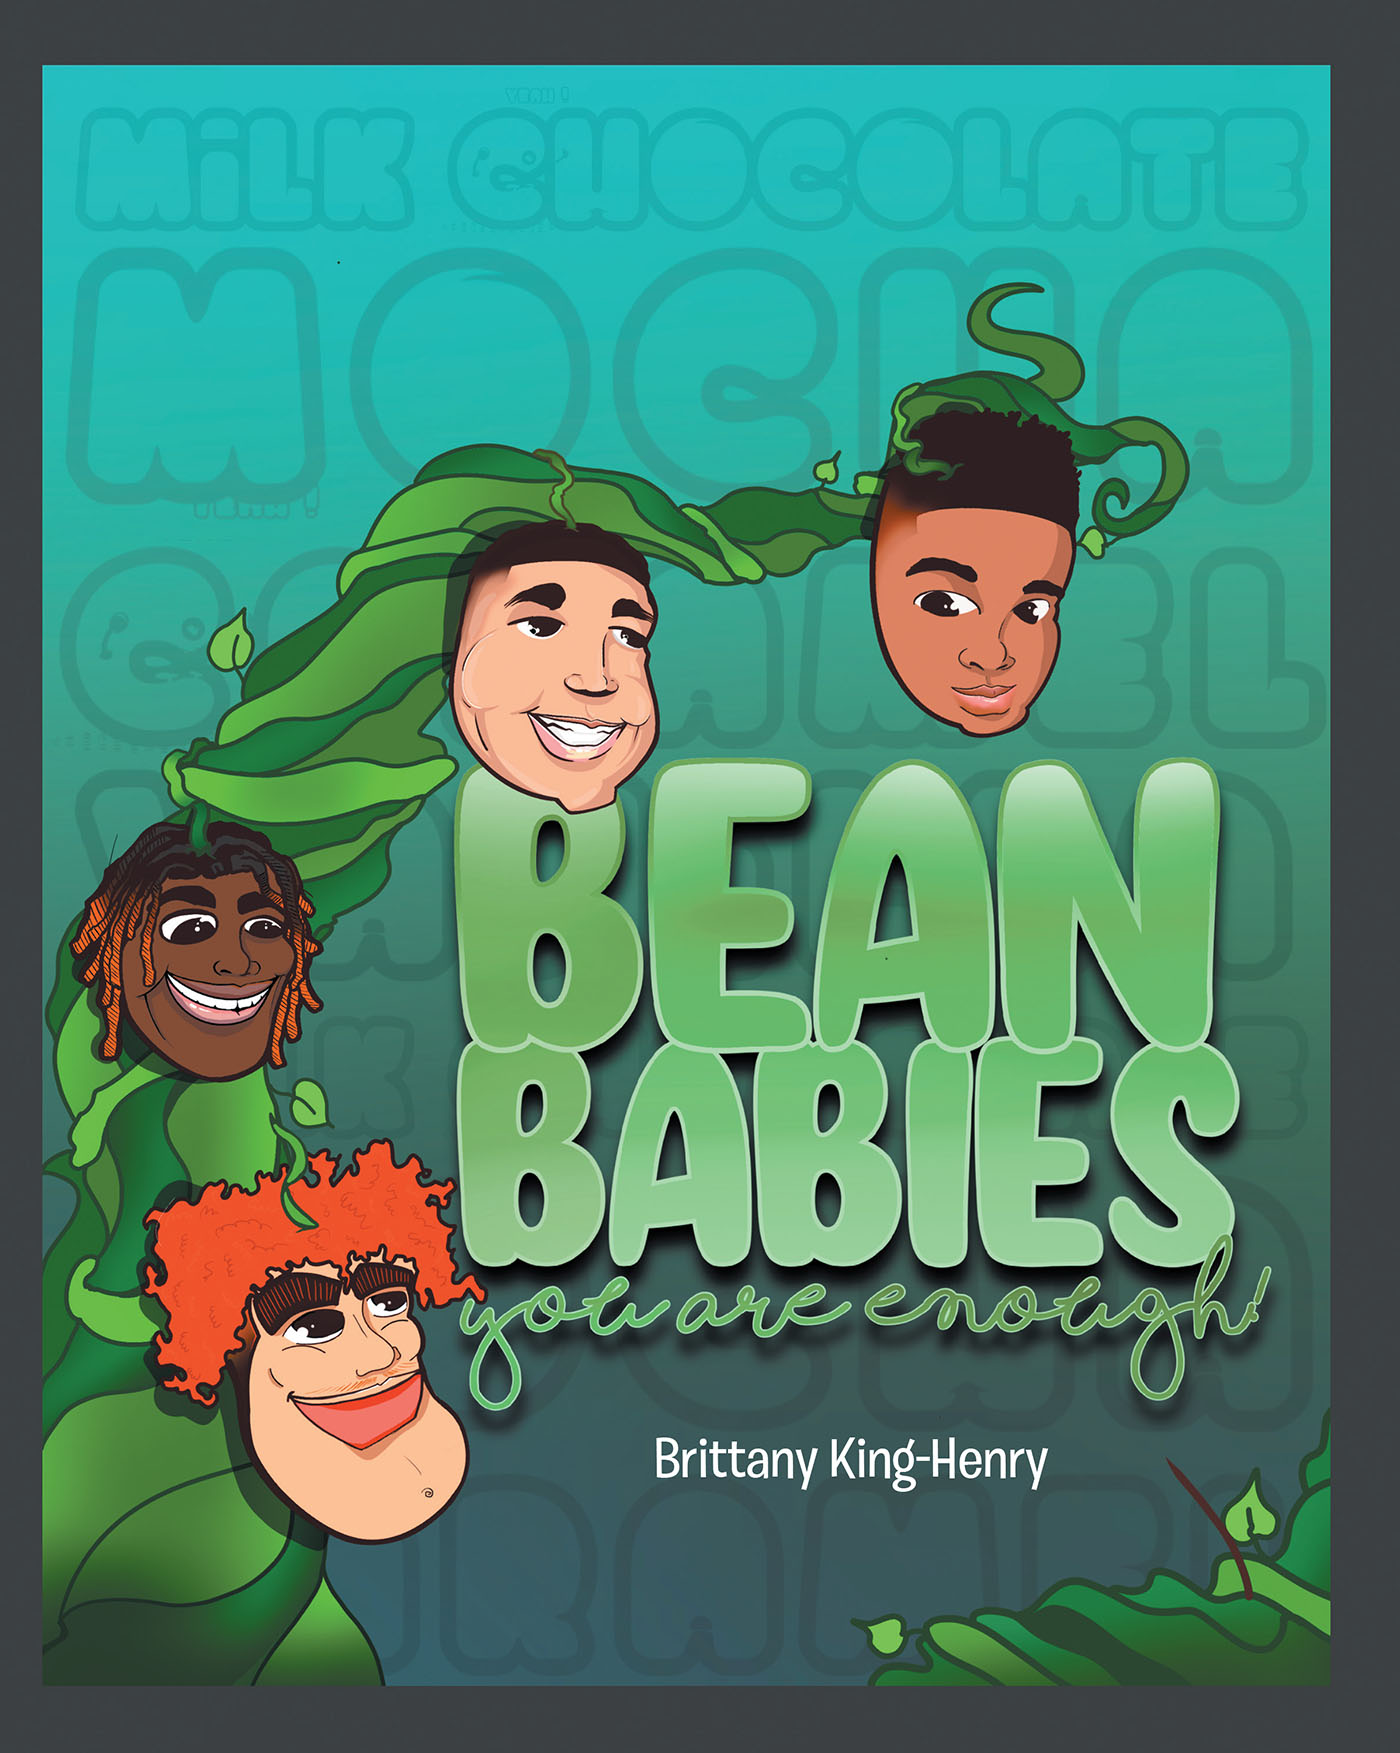 Brittany King-Henry’s Newly Released “Bean Babies, you are enough!” is an Important Reminder of God’s Blessings on Each of Us